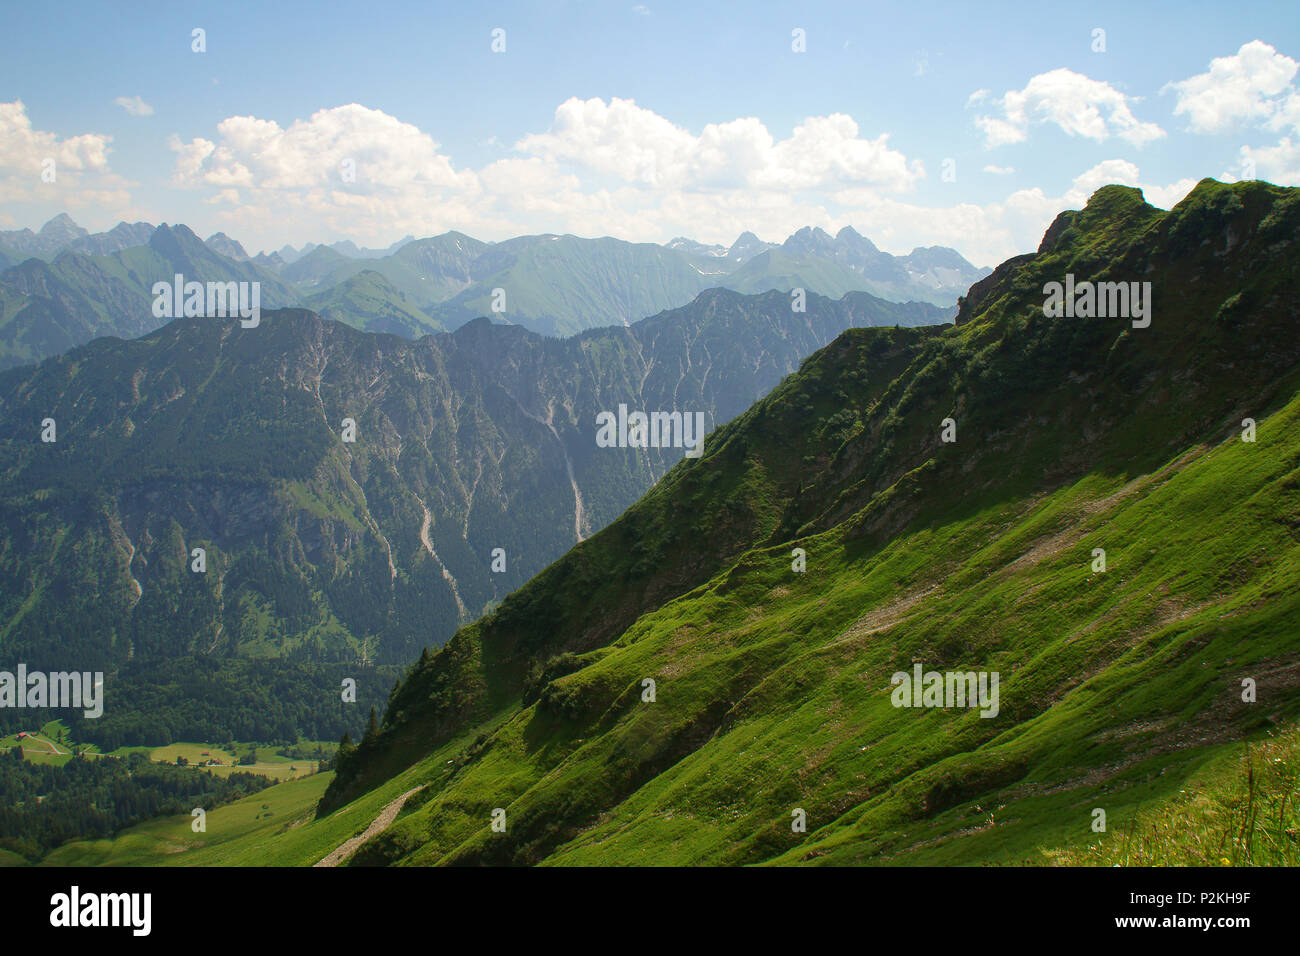 View on the green peaks of the Allgaeu mountains in summer, Oberstdorf, Germany Stock Photo